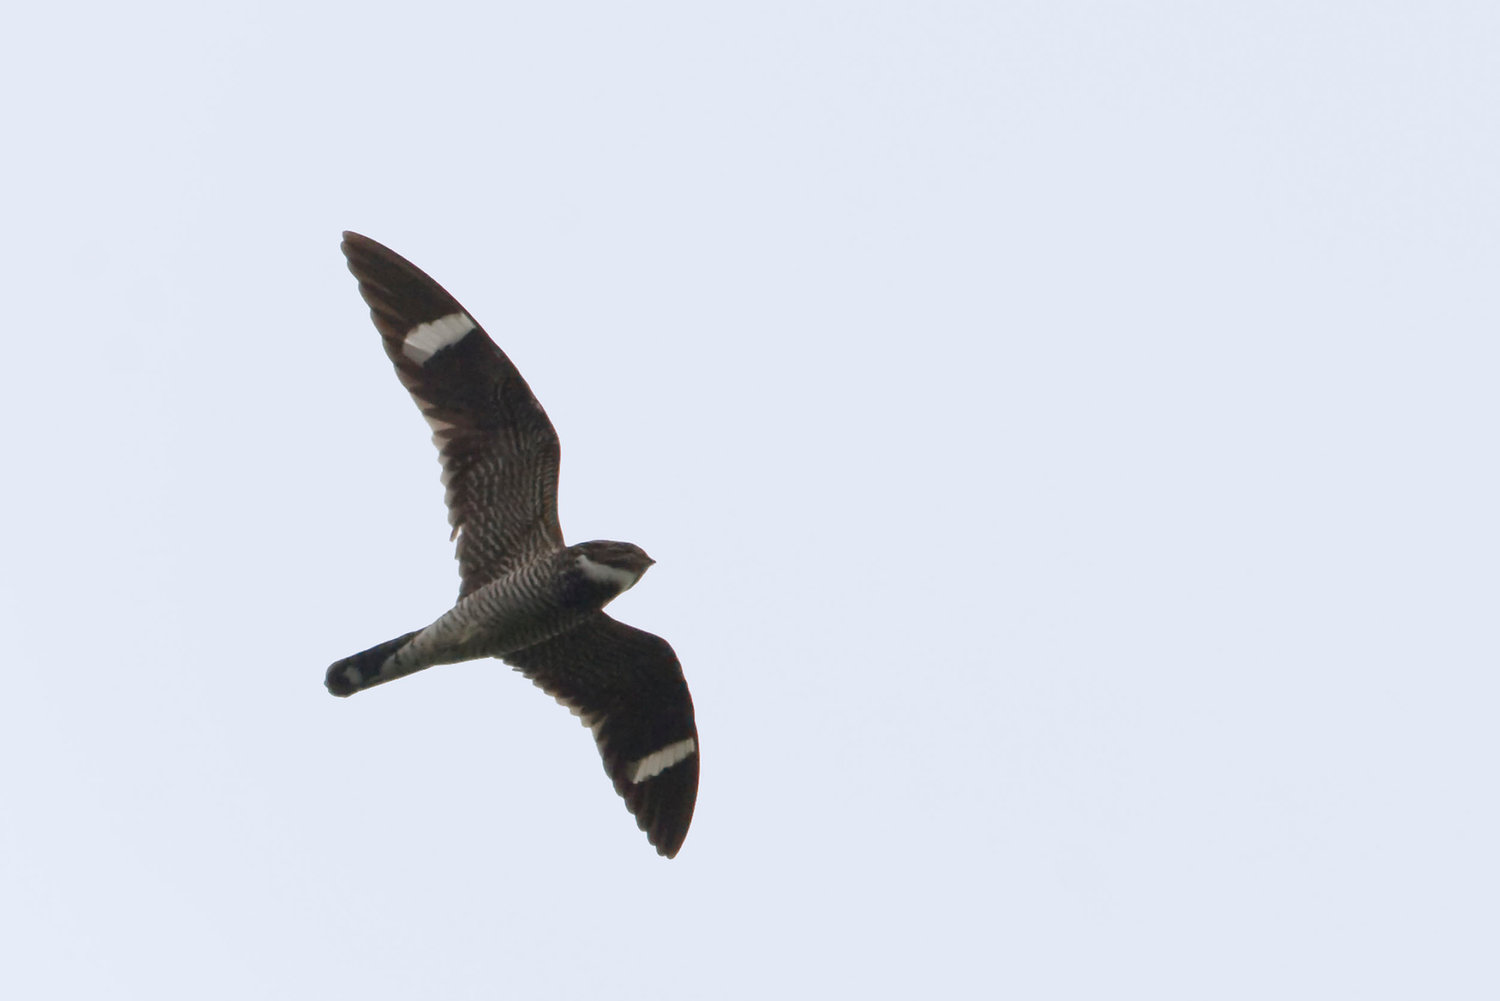 This is a male Common Nighthawk, Chordeiles minor, flying at dusk.